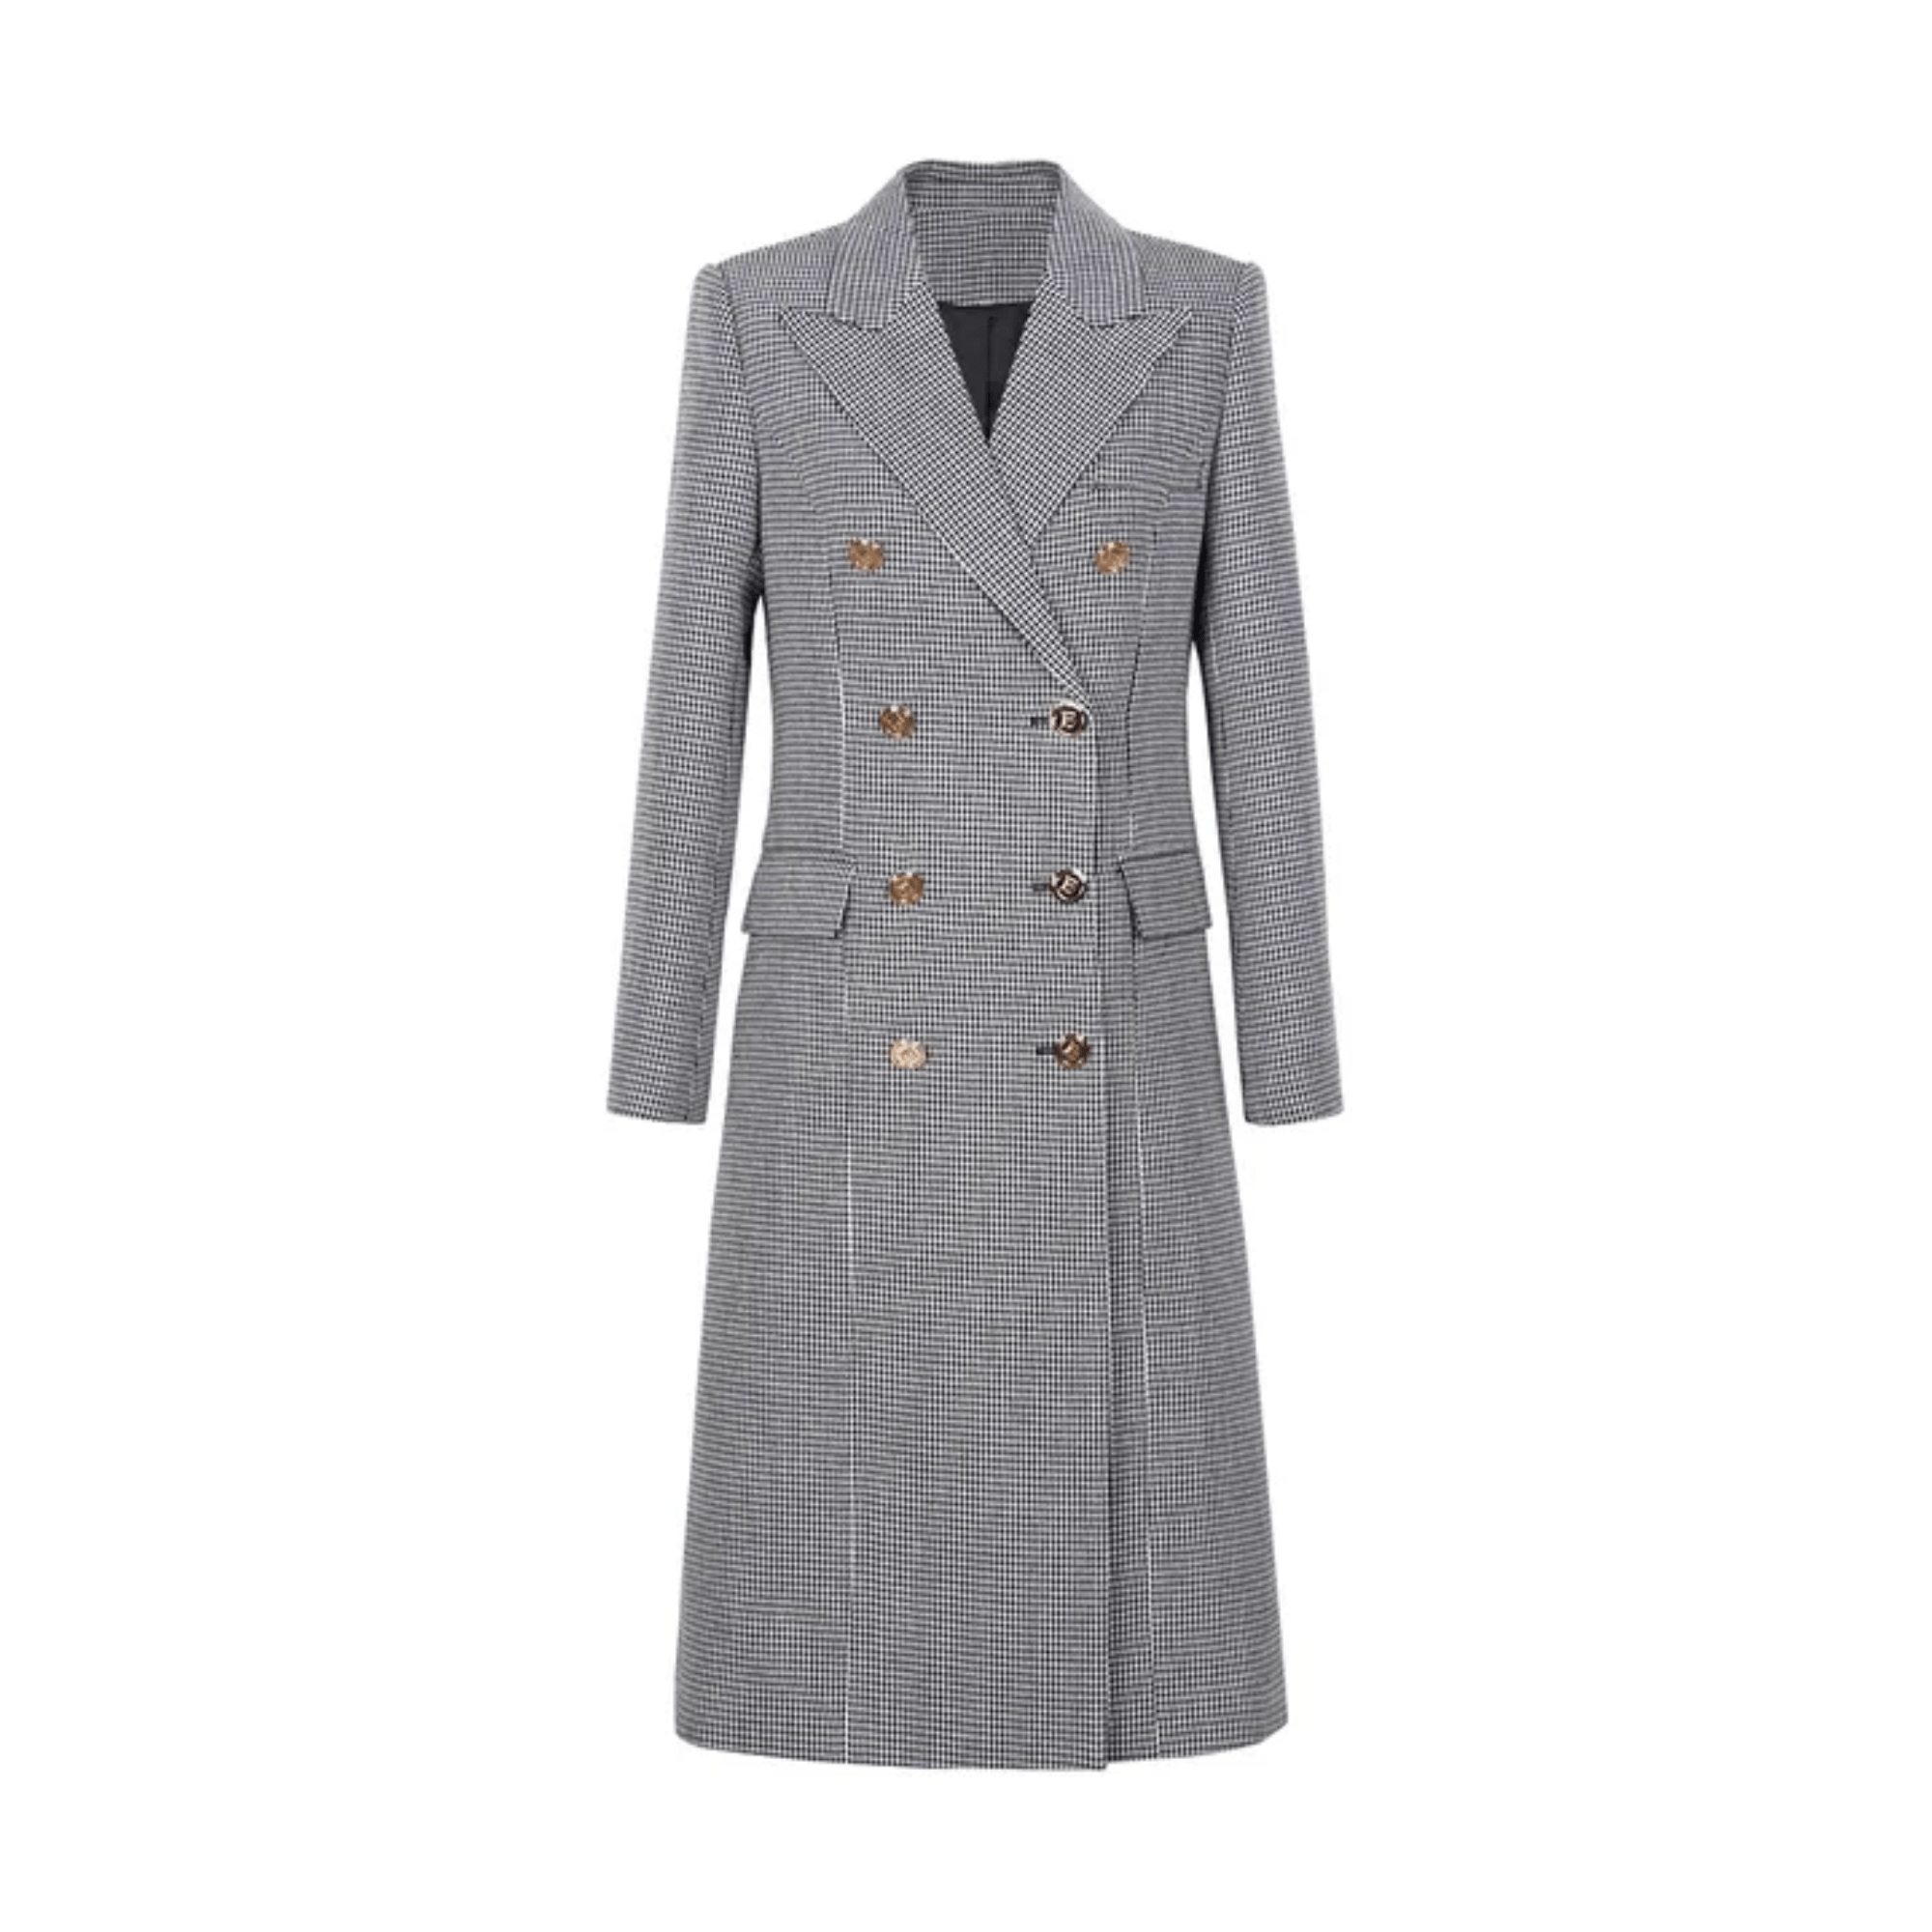 Decorative Gold Buttons Houndstooth Coat - Kelly Obi New York